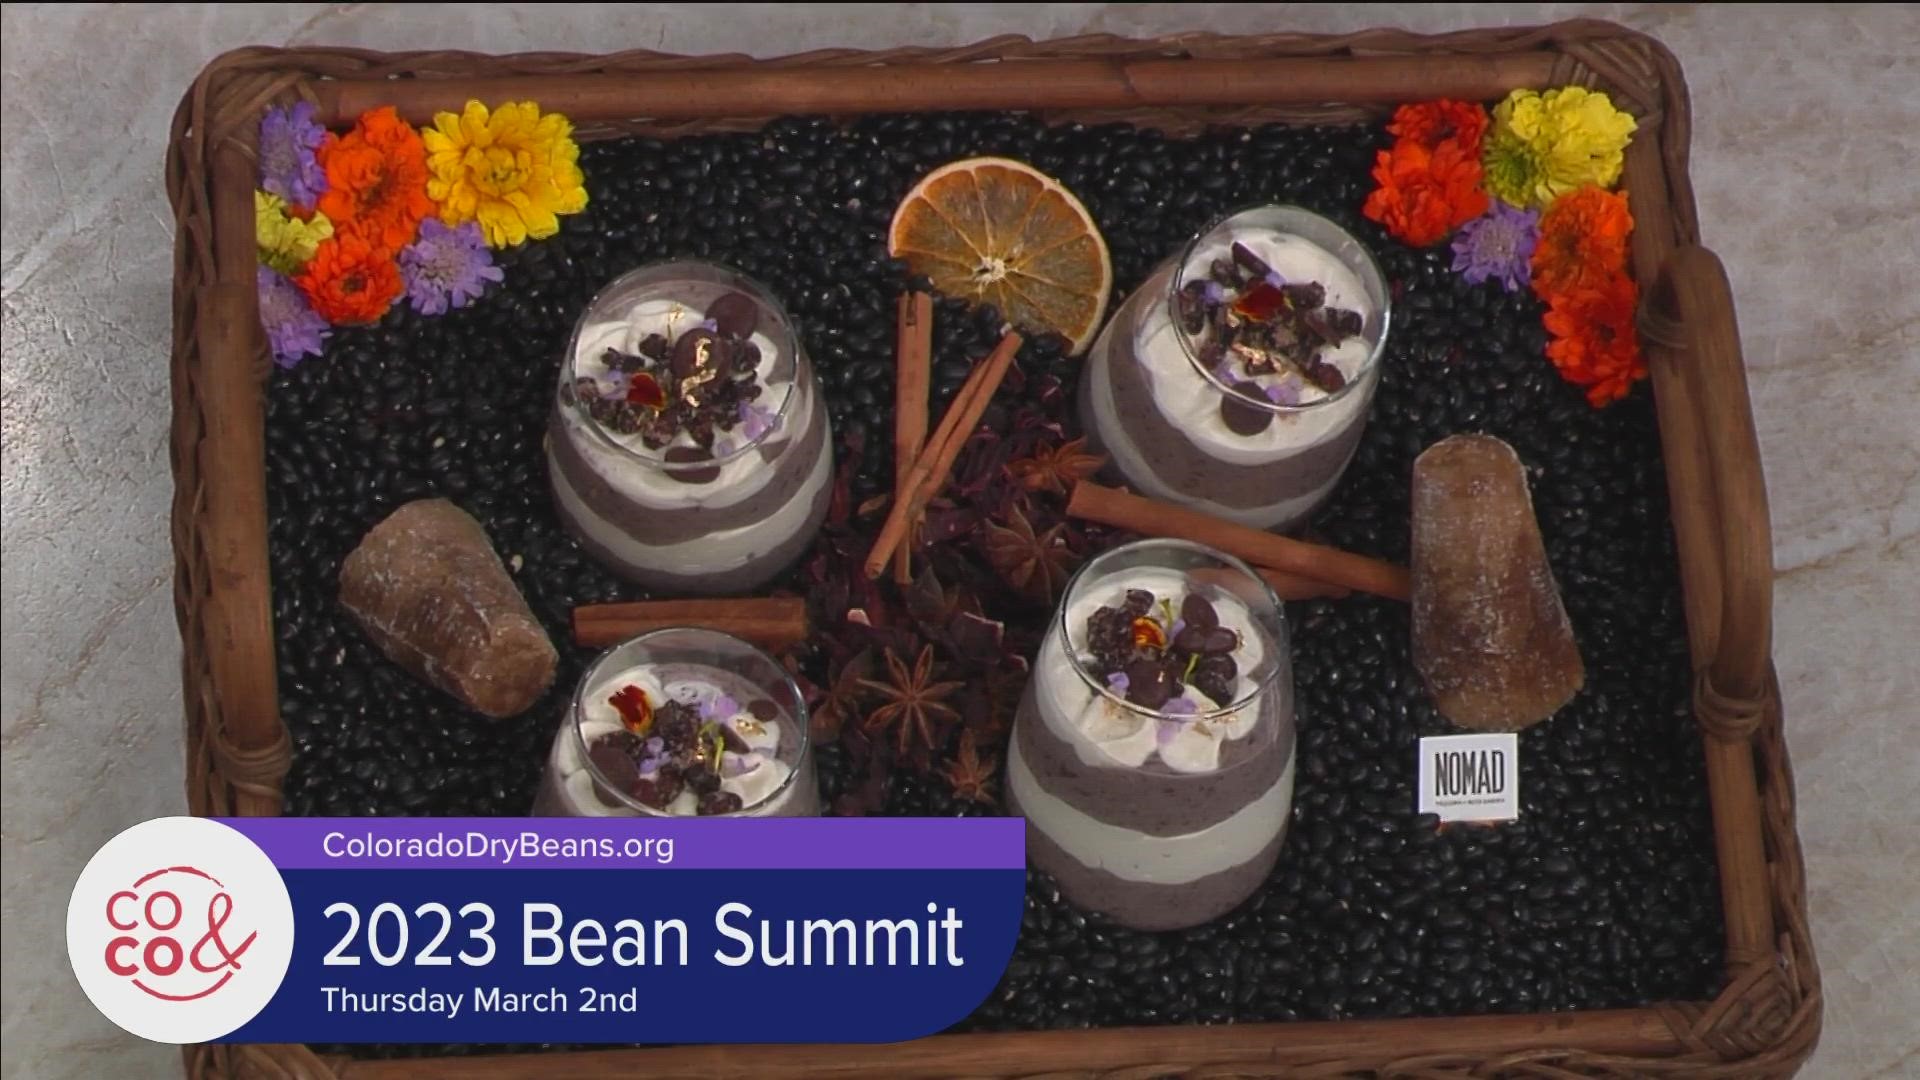 The Hispanic Cooking Competition will happen at the 2023 Bean Summit on March 2nd! Learn more at ColoradoDryBeans.org.